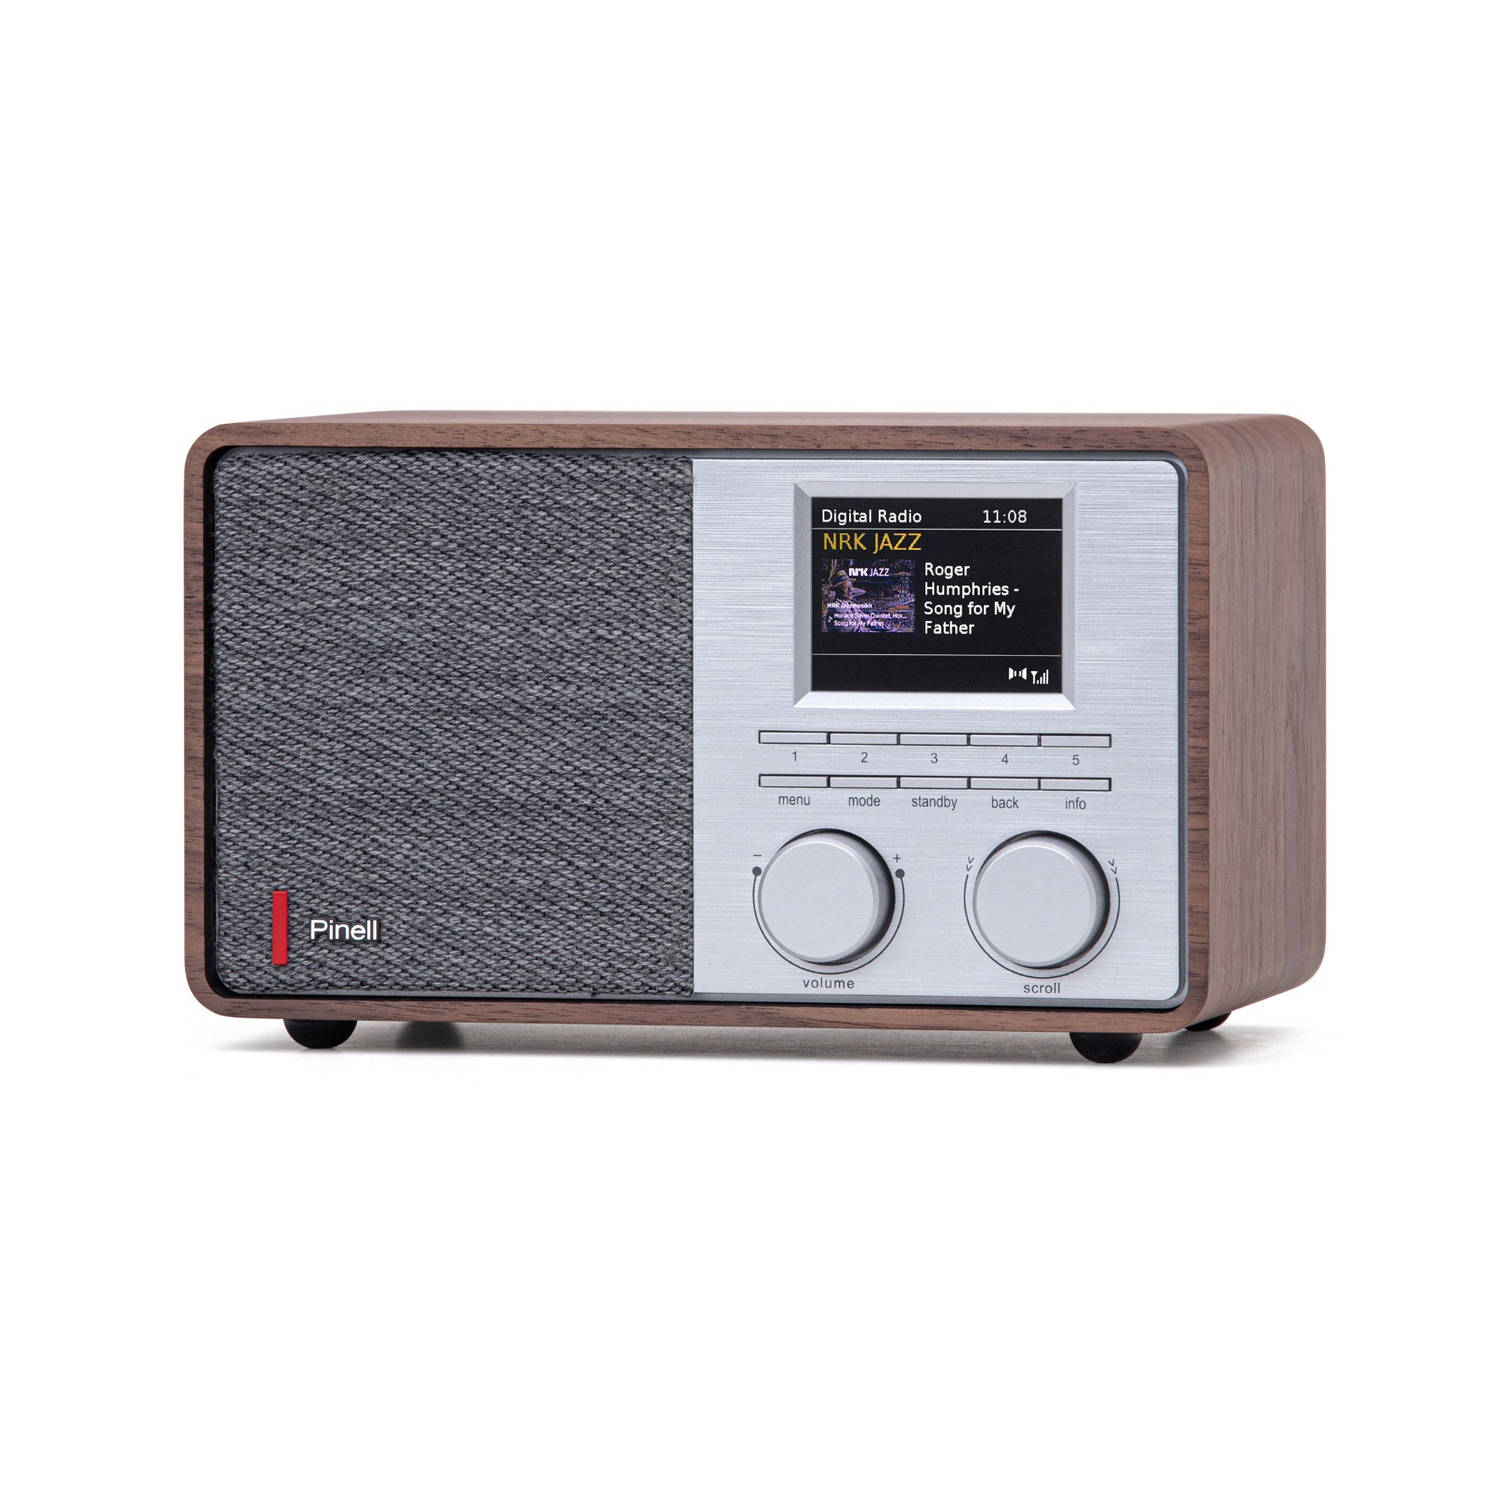 Pinell Supersound 201w Dab+-internet Tafelradio Walnoothout